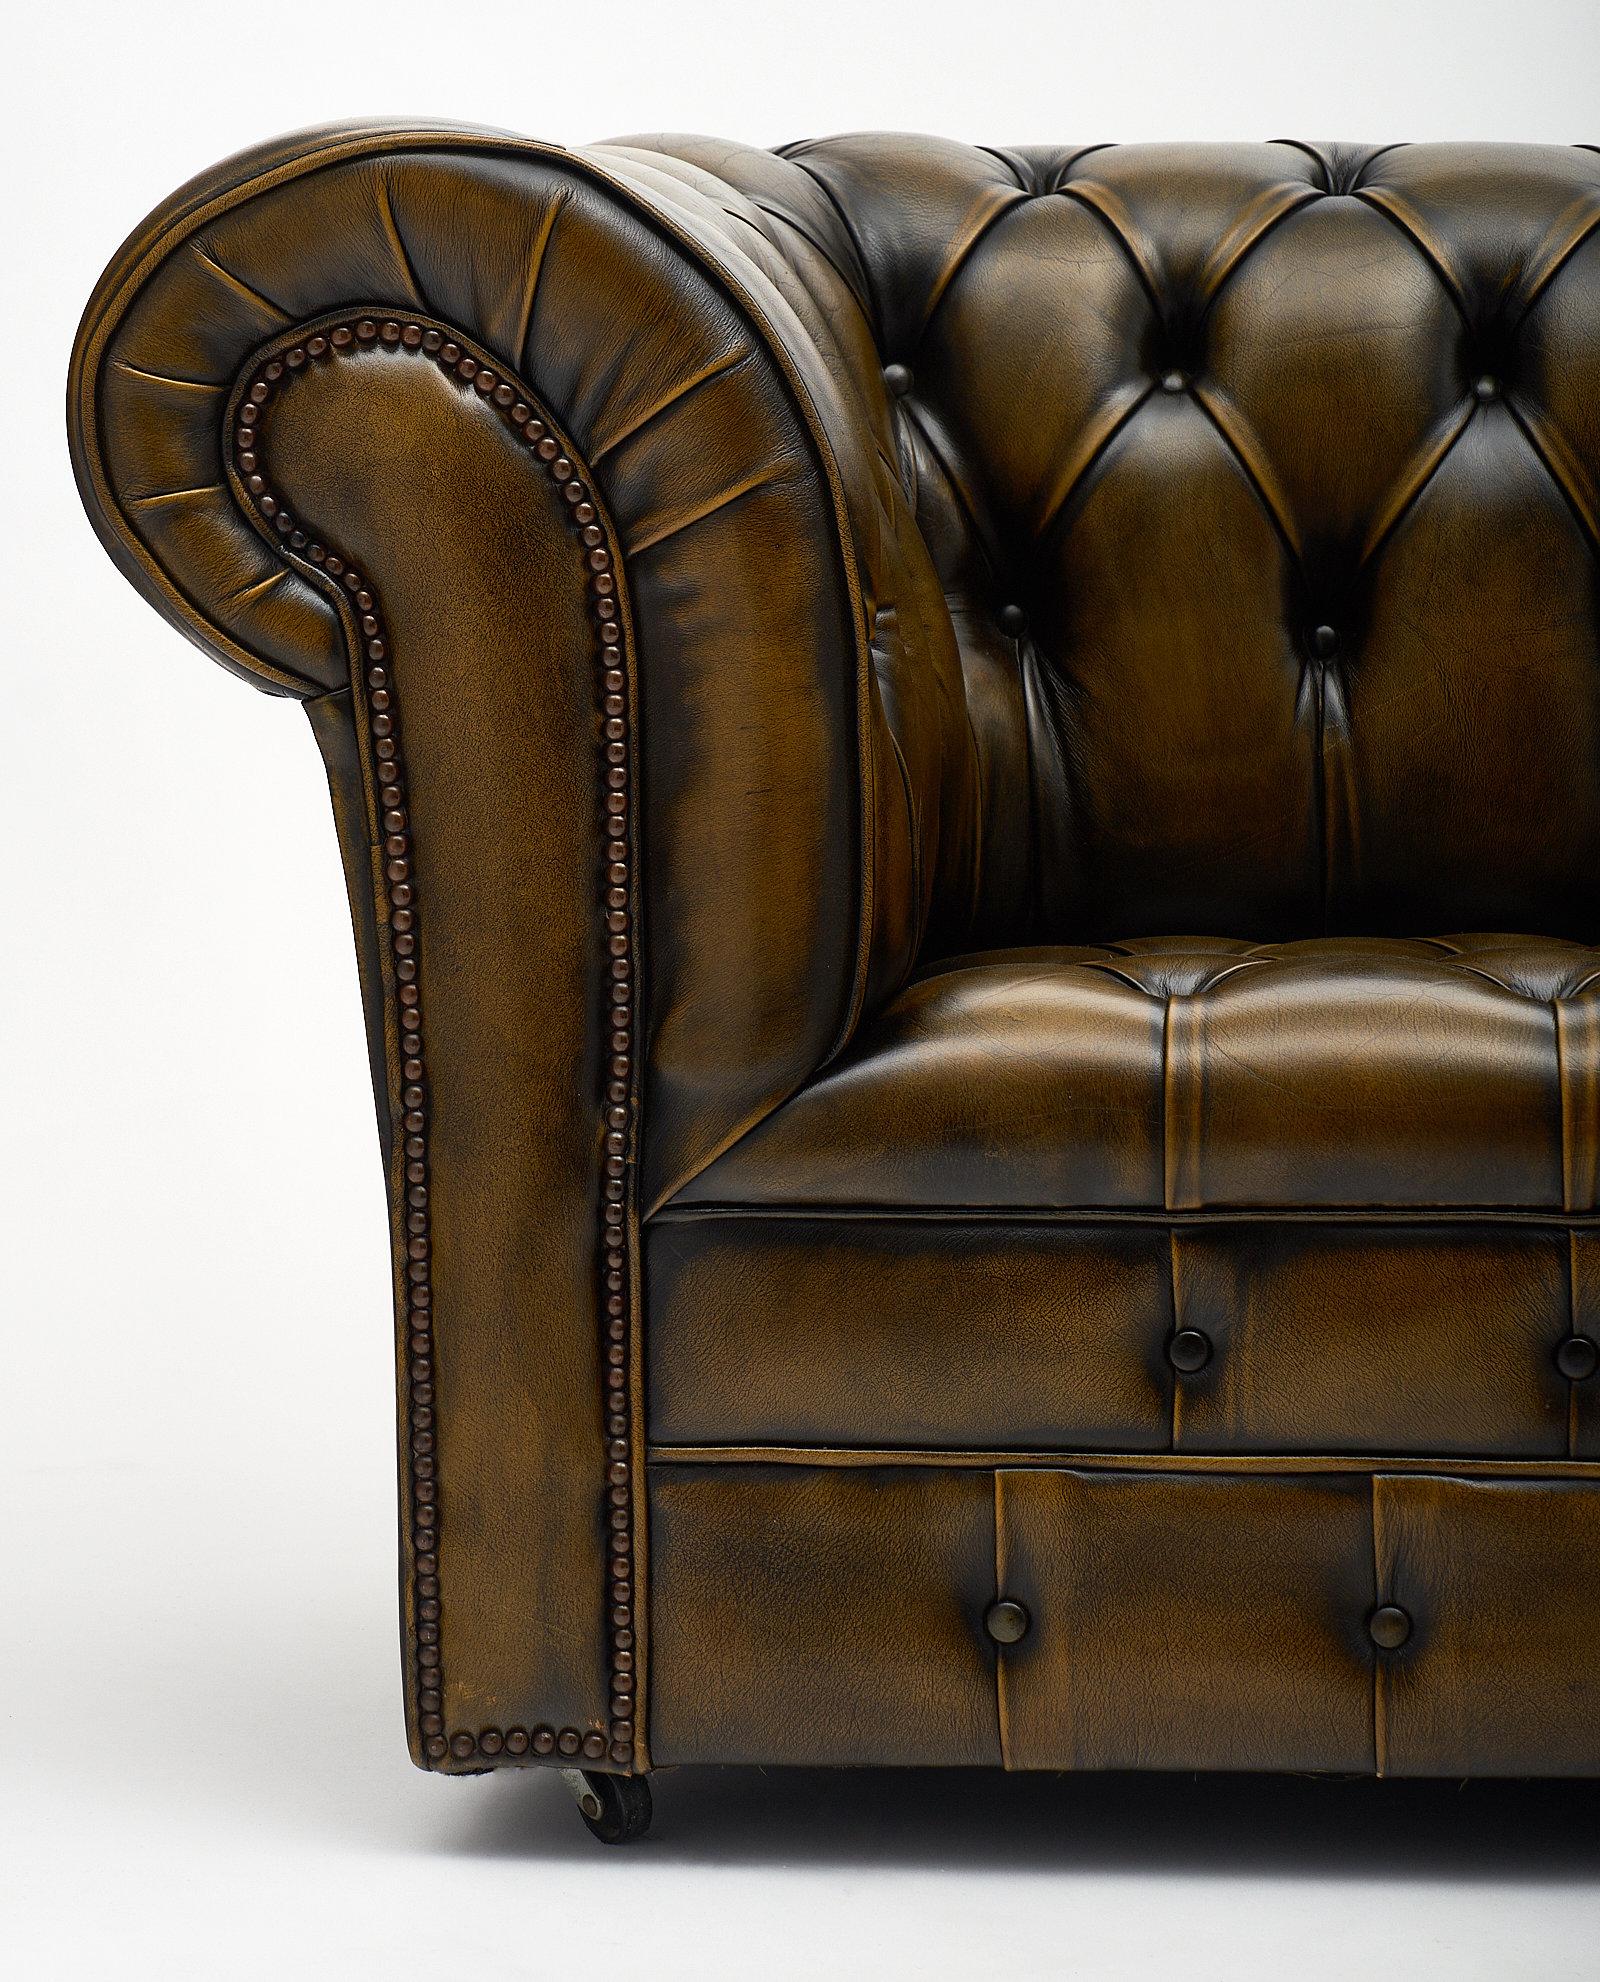 Leather Vintage English Chesterfield Sofa 3